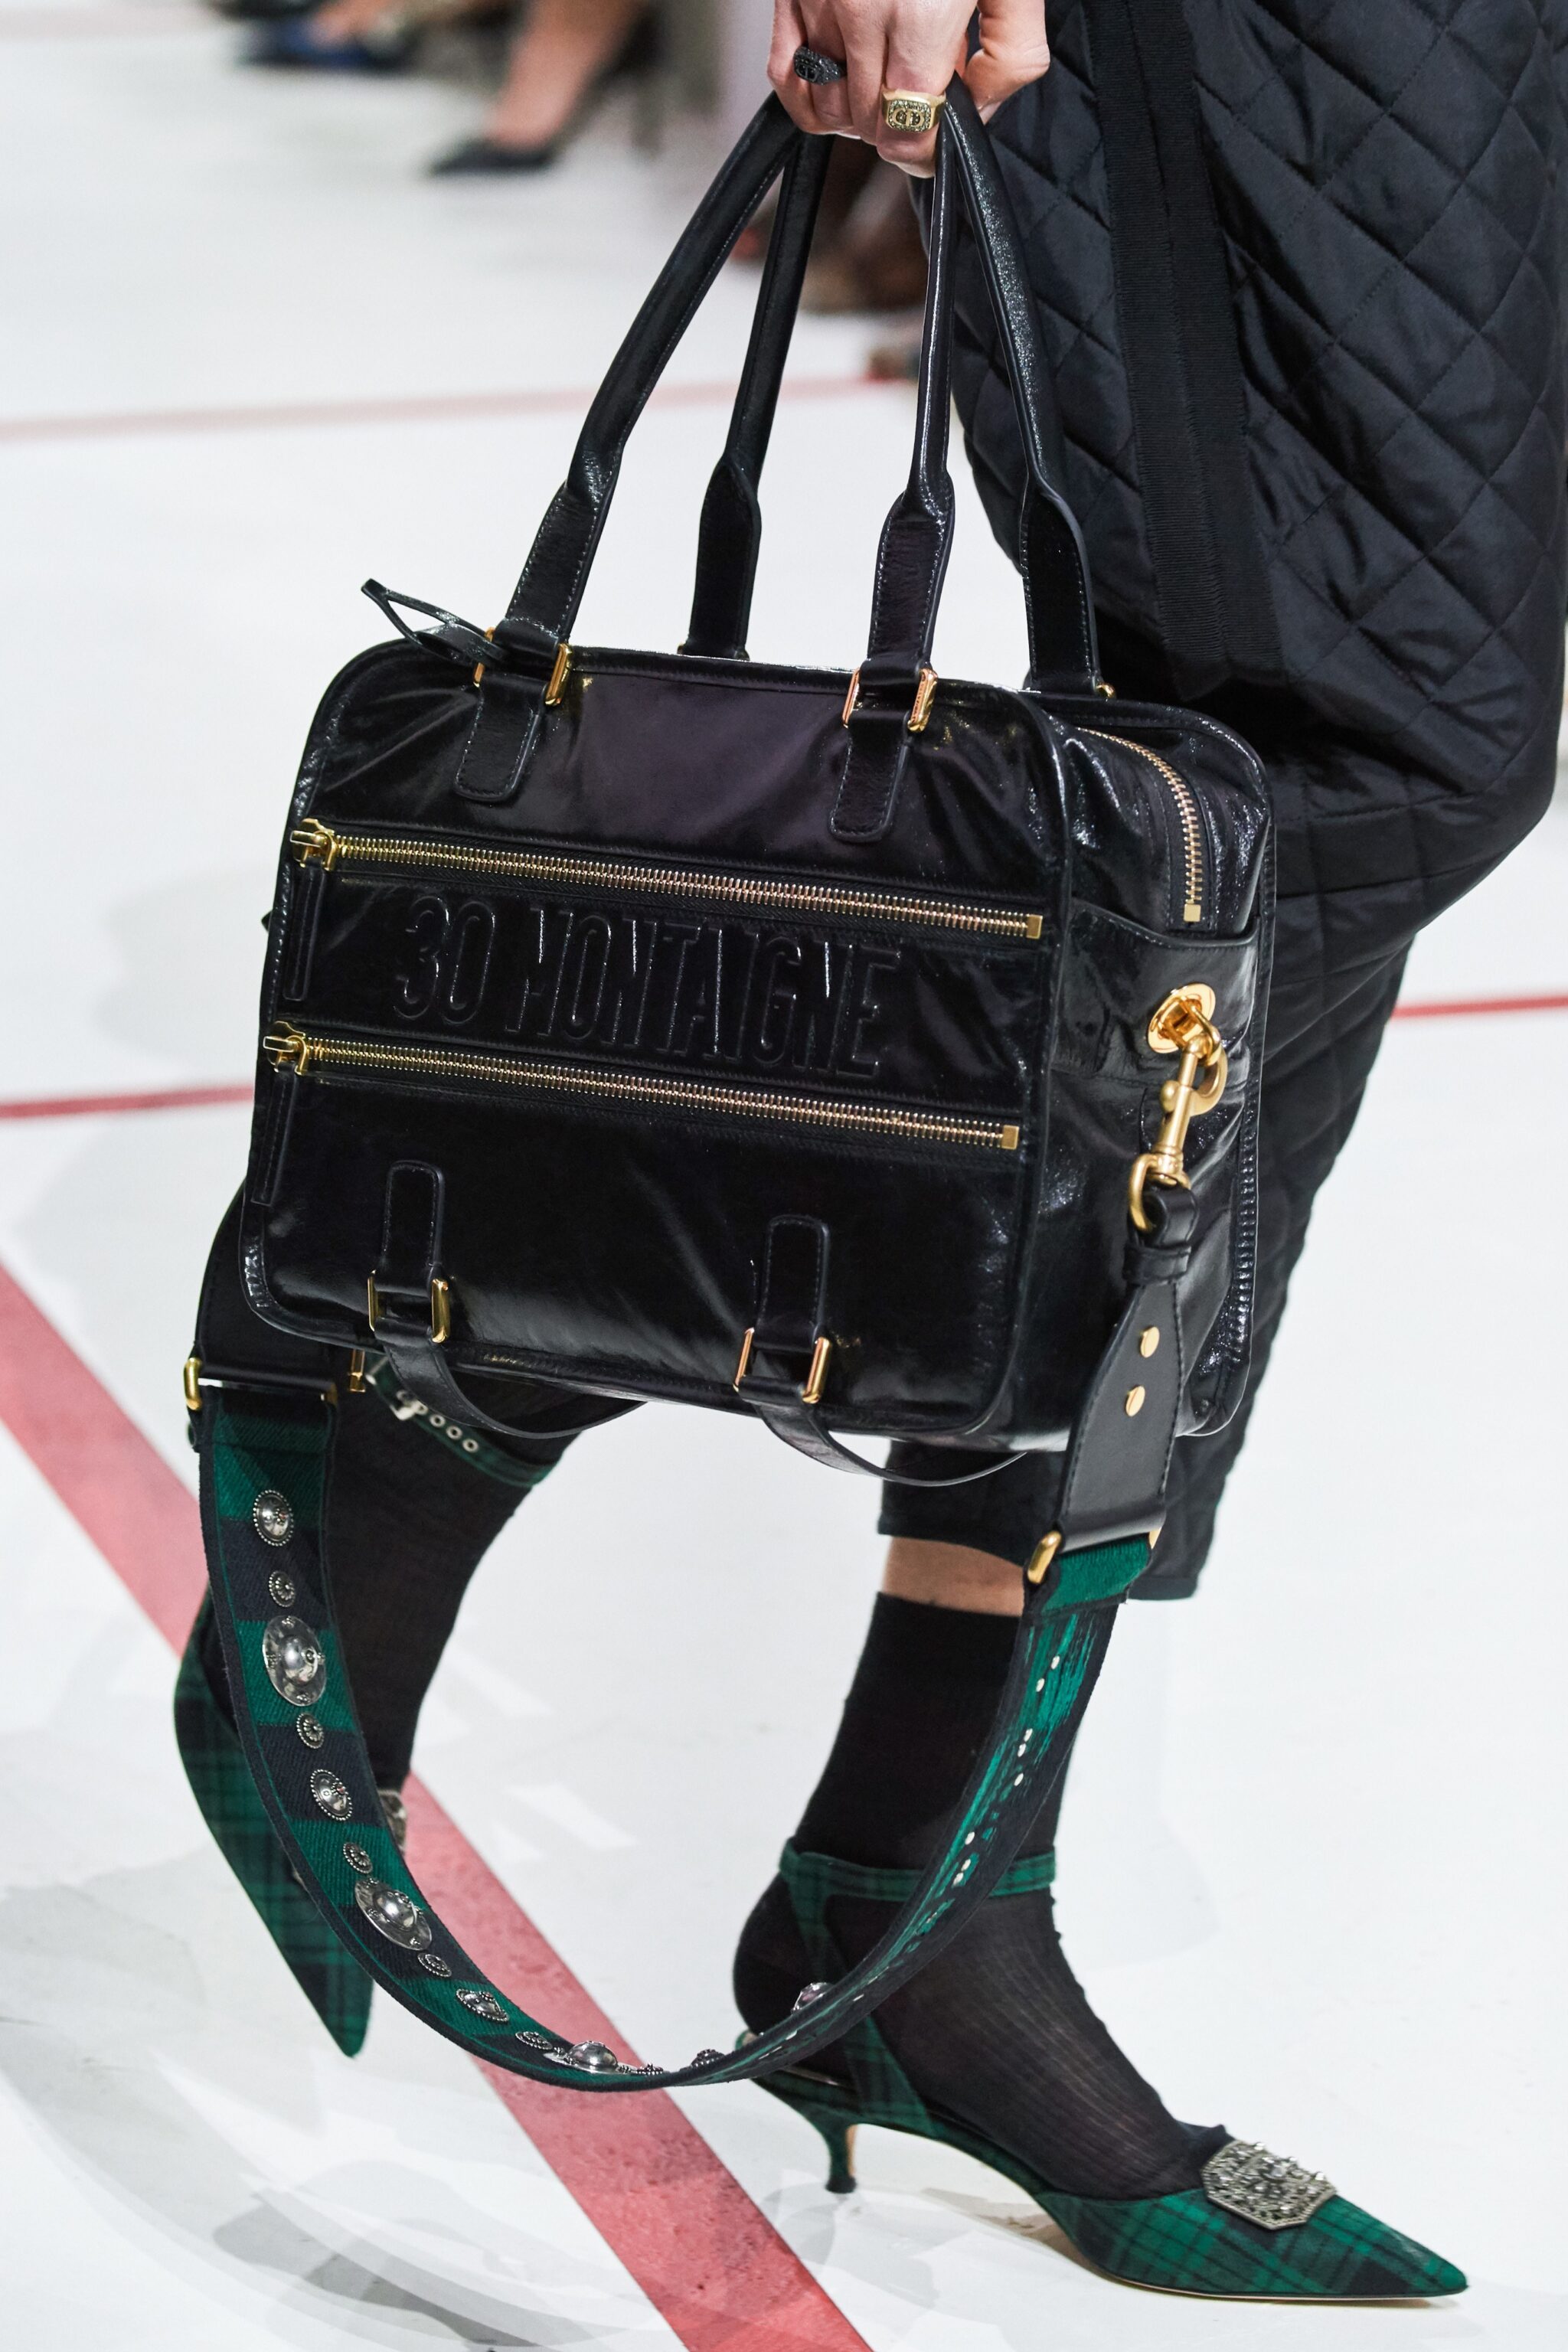 Dior Fall/Winter 2019 Runway Bag Collection | Spotted Fashion